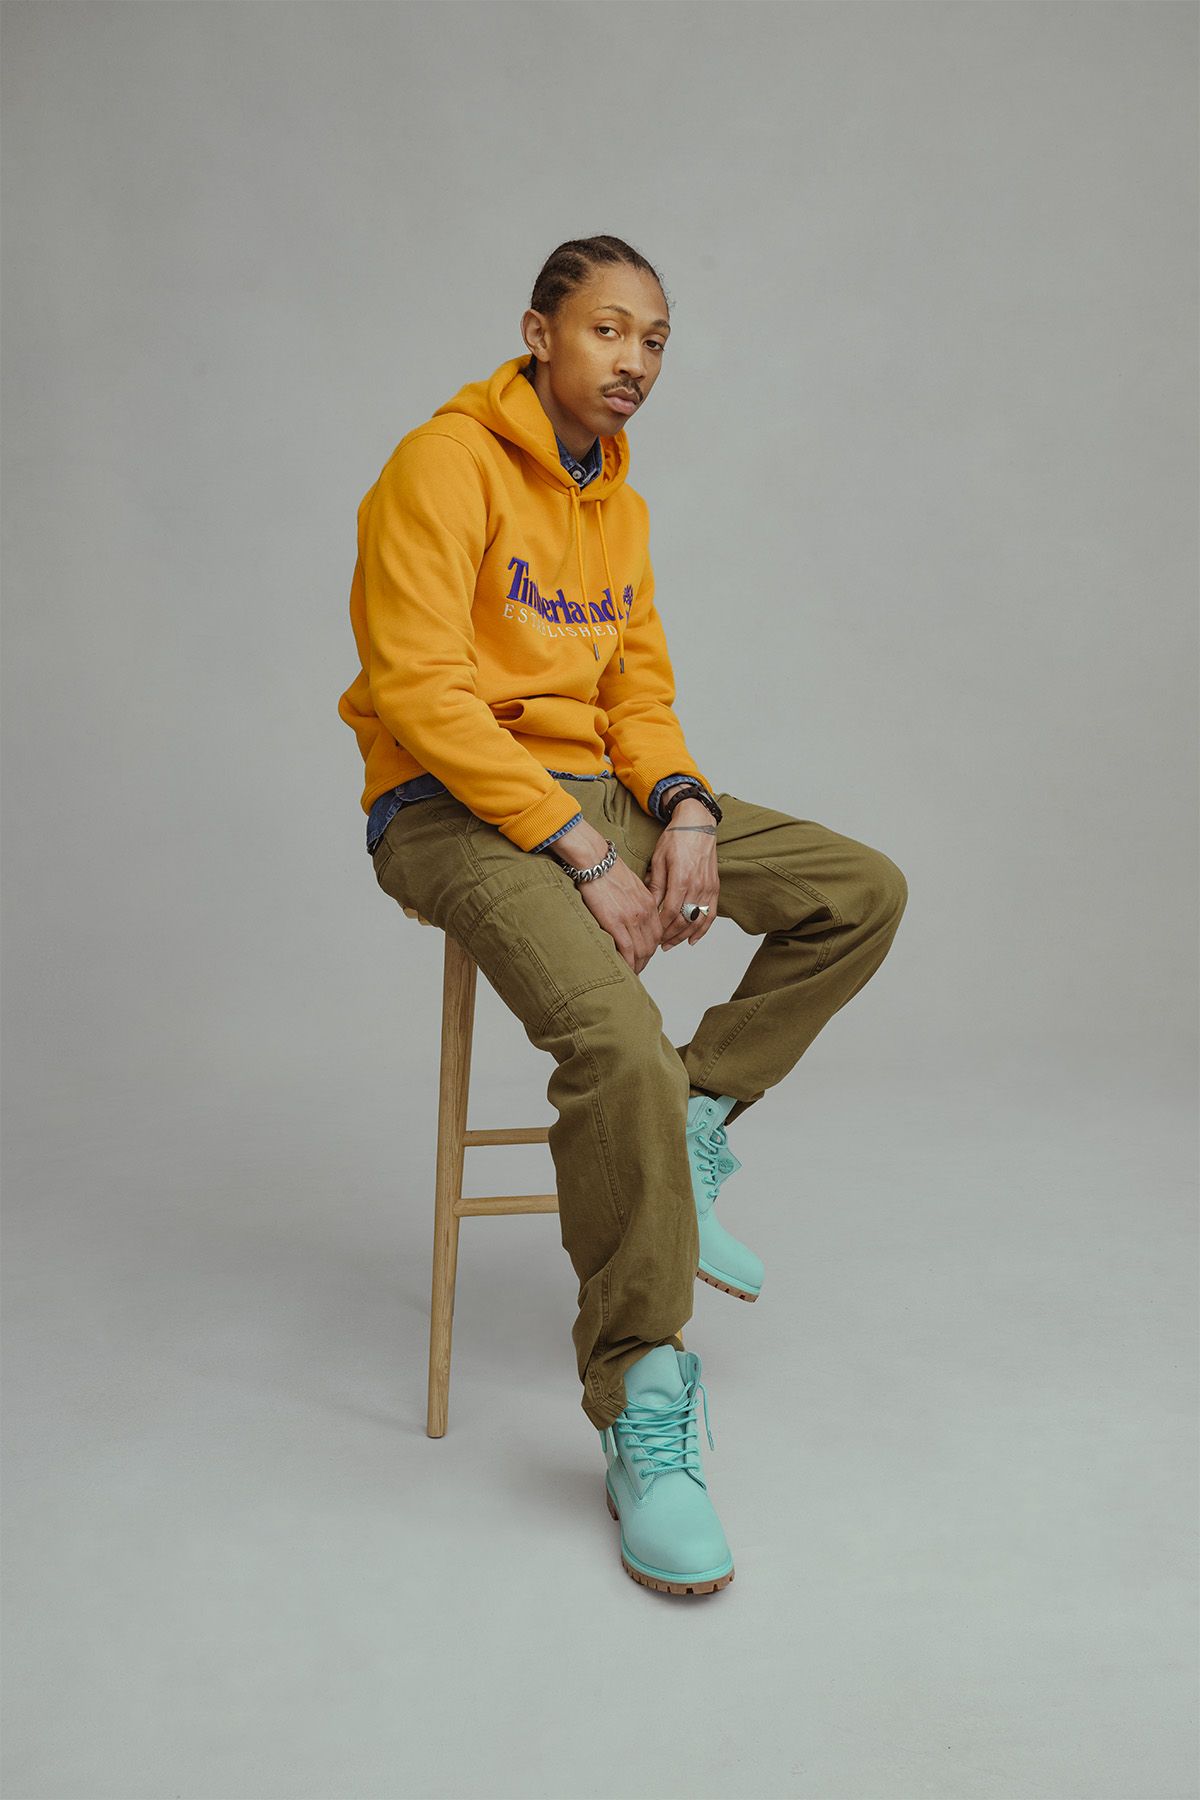 Man sitting in chare with orange Timberland sweatshirt and Holiday light blue colorway Timberland boots